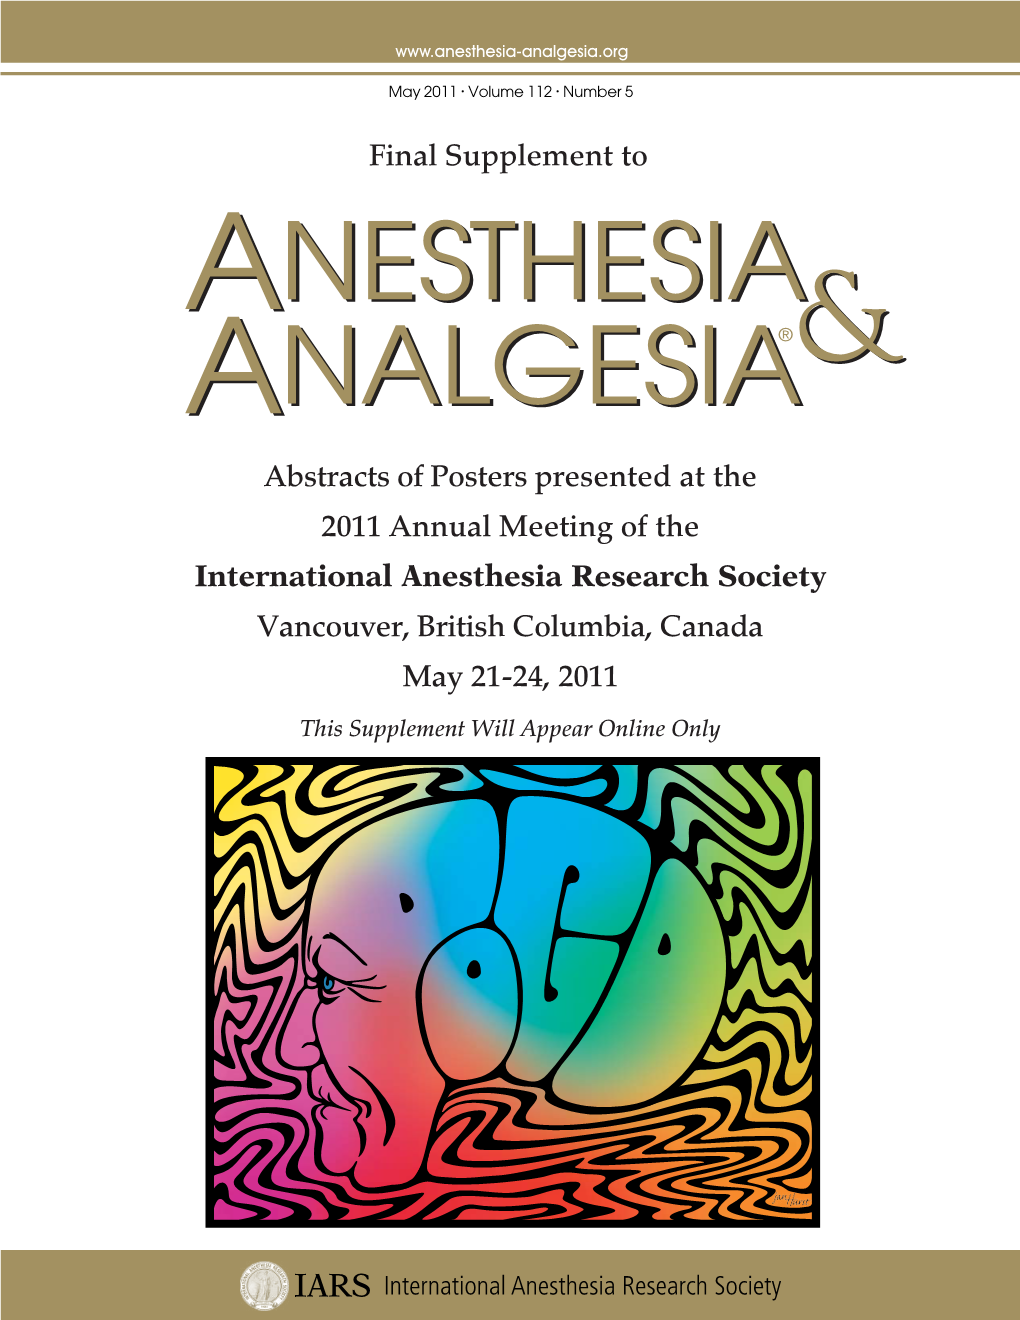 Abstracts of Posters Presented at the 2011 Annual Meeting of the International Anesthesia Research Society Vancouver, British Columbia, Canada May 21-24, 2011